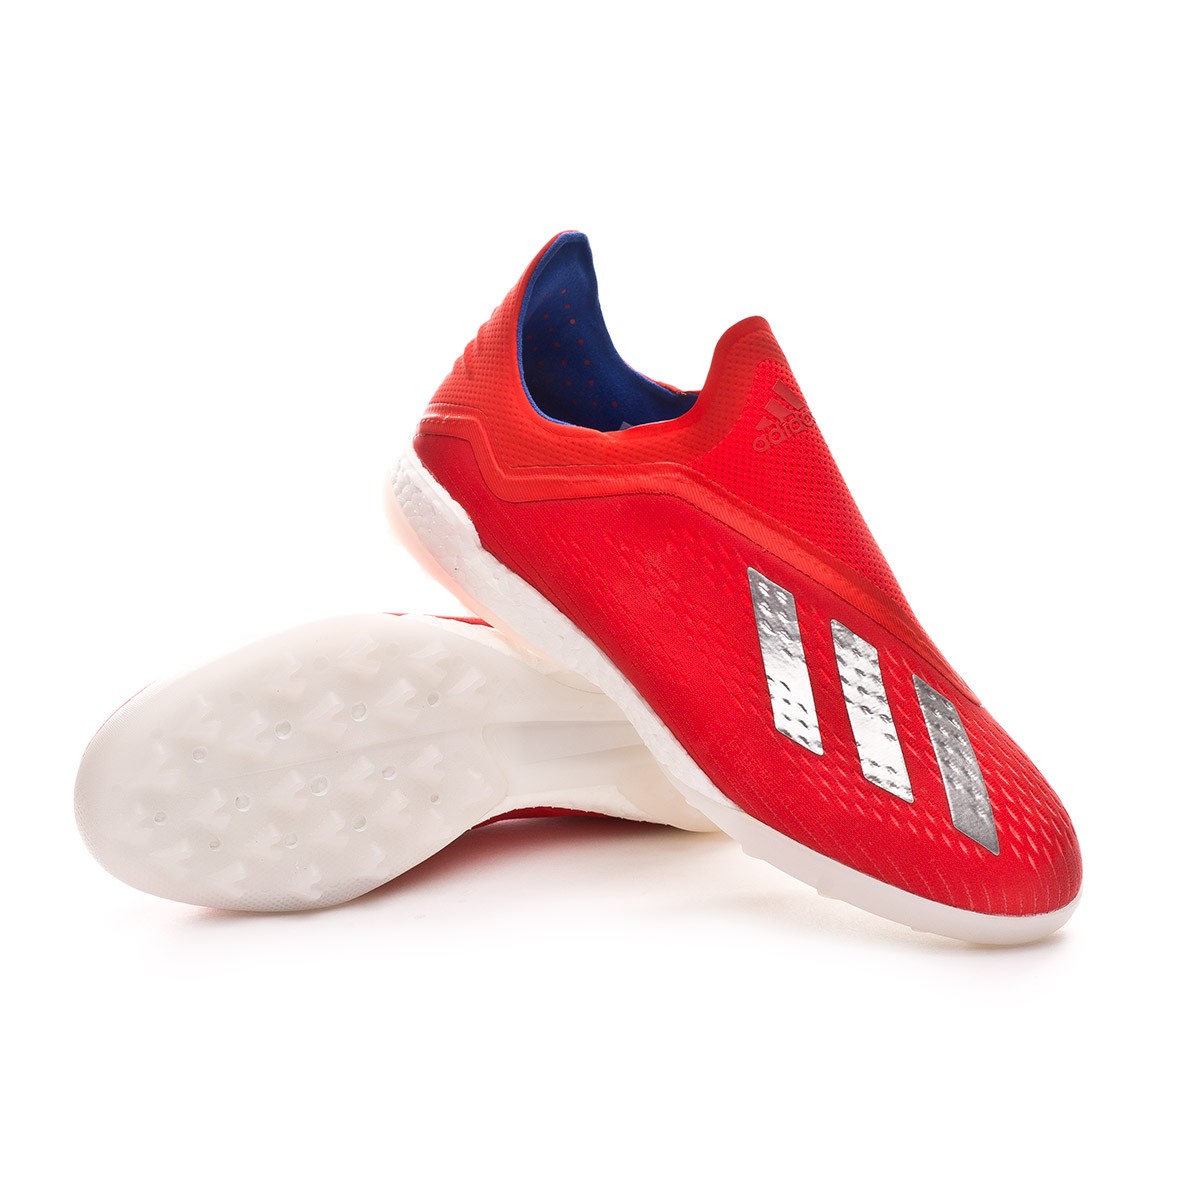 best adidas turf soccer shoes